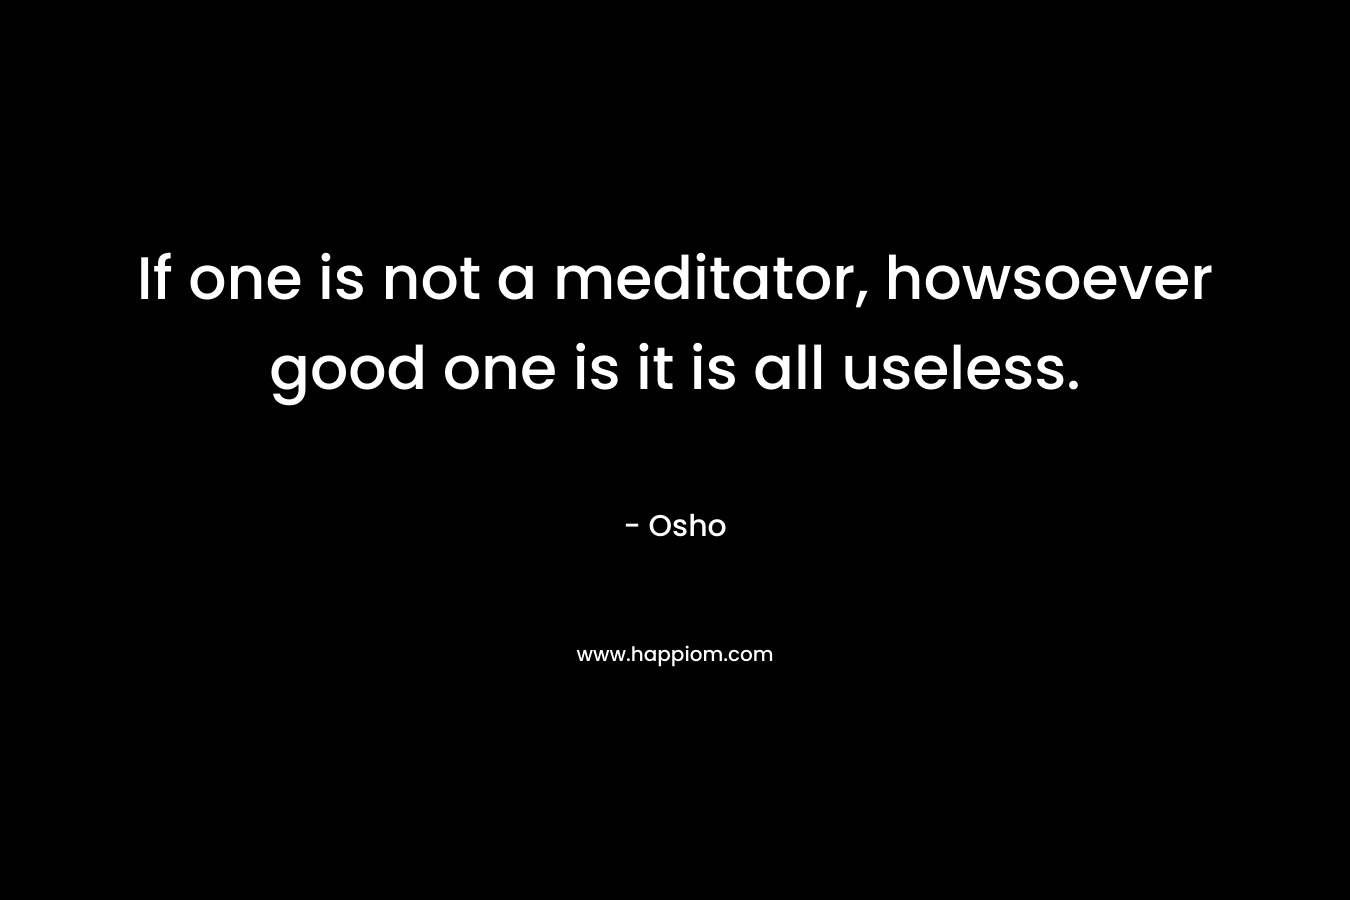 If one is not a meditator, howsoever good one is it is all useless. – Osho